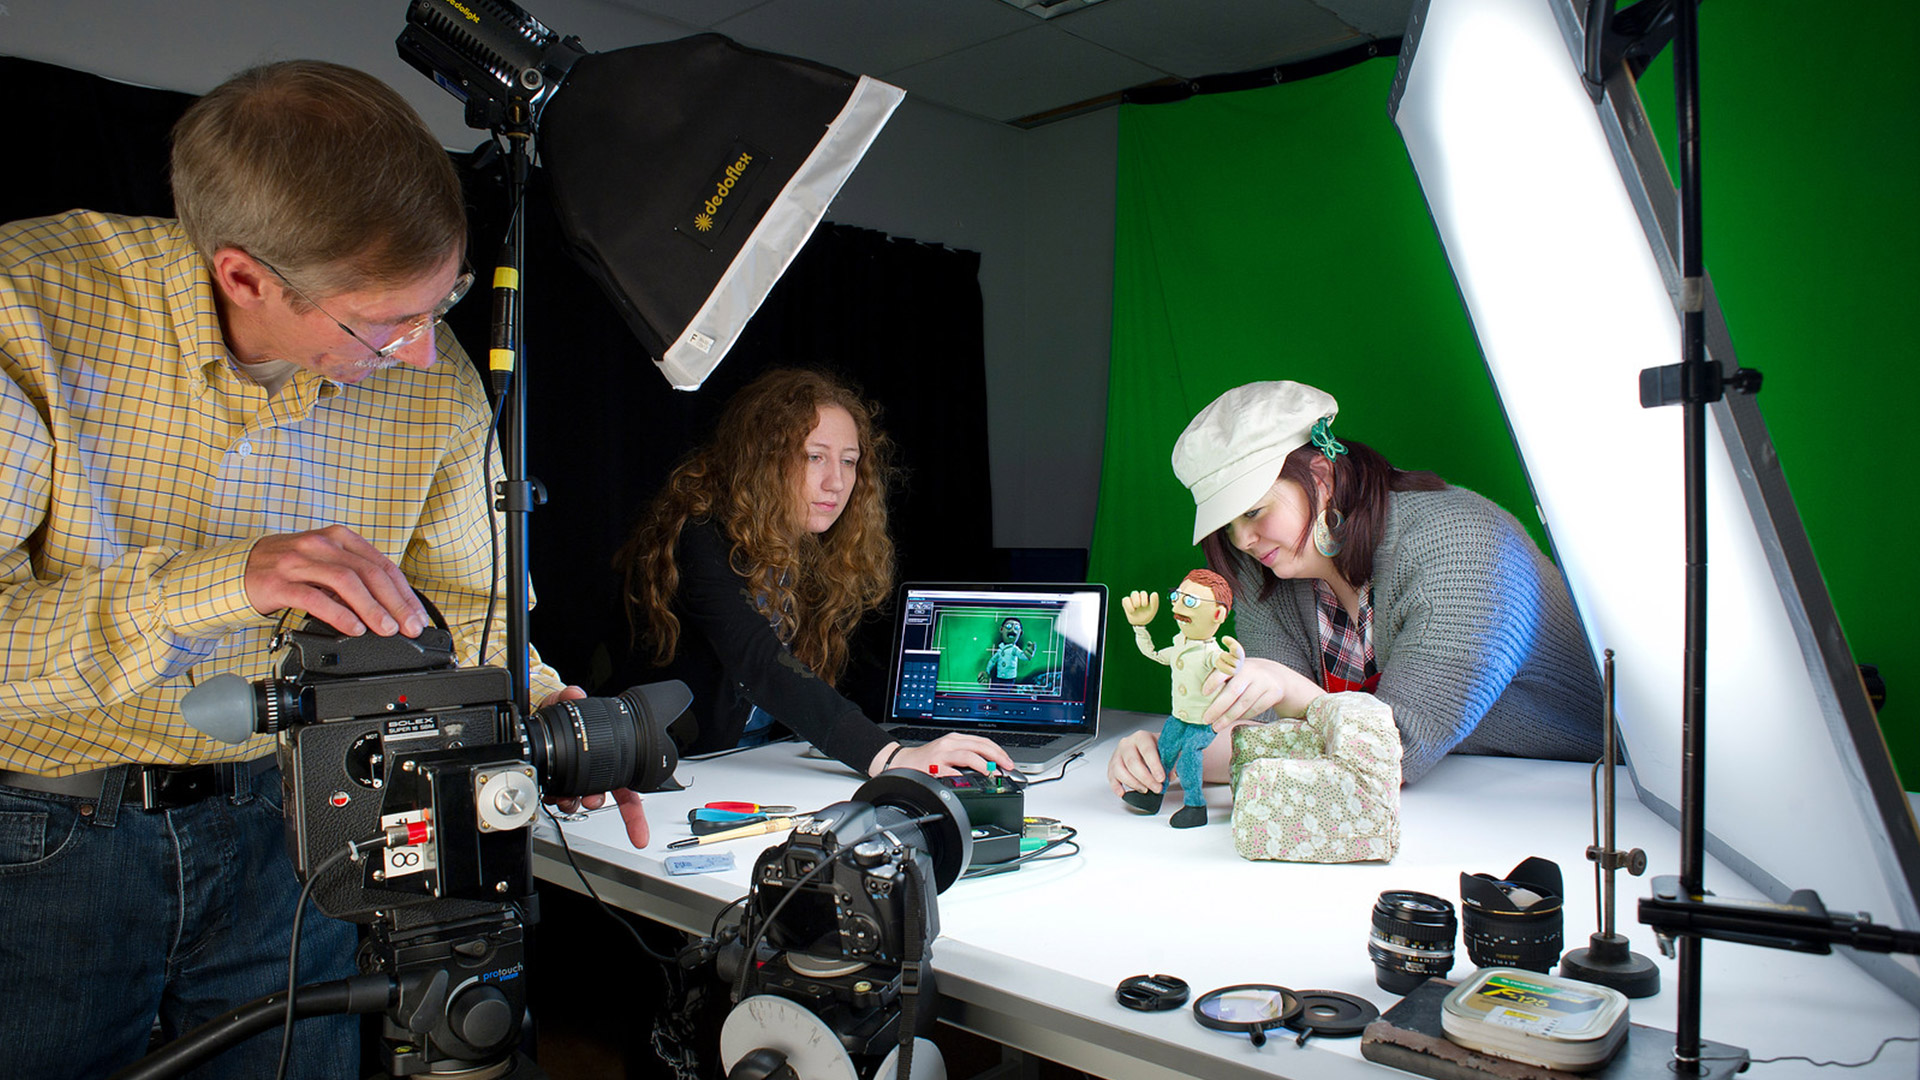 Animation students setting up a video of a clay model in the studio